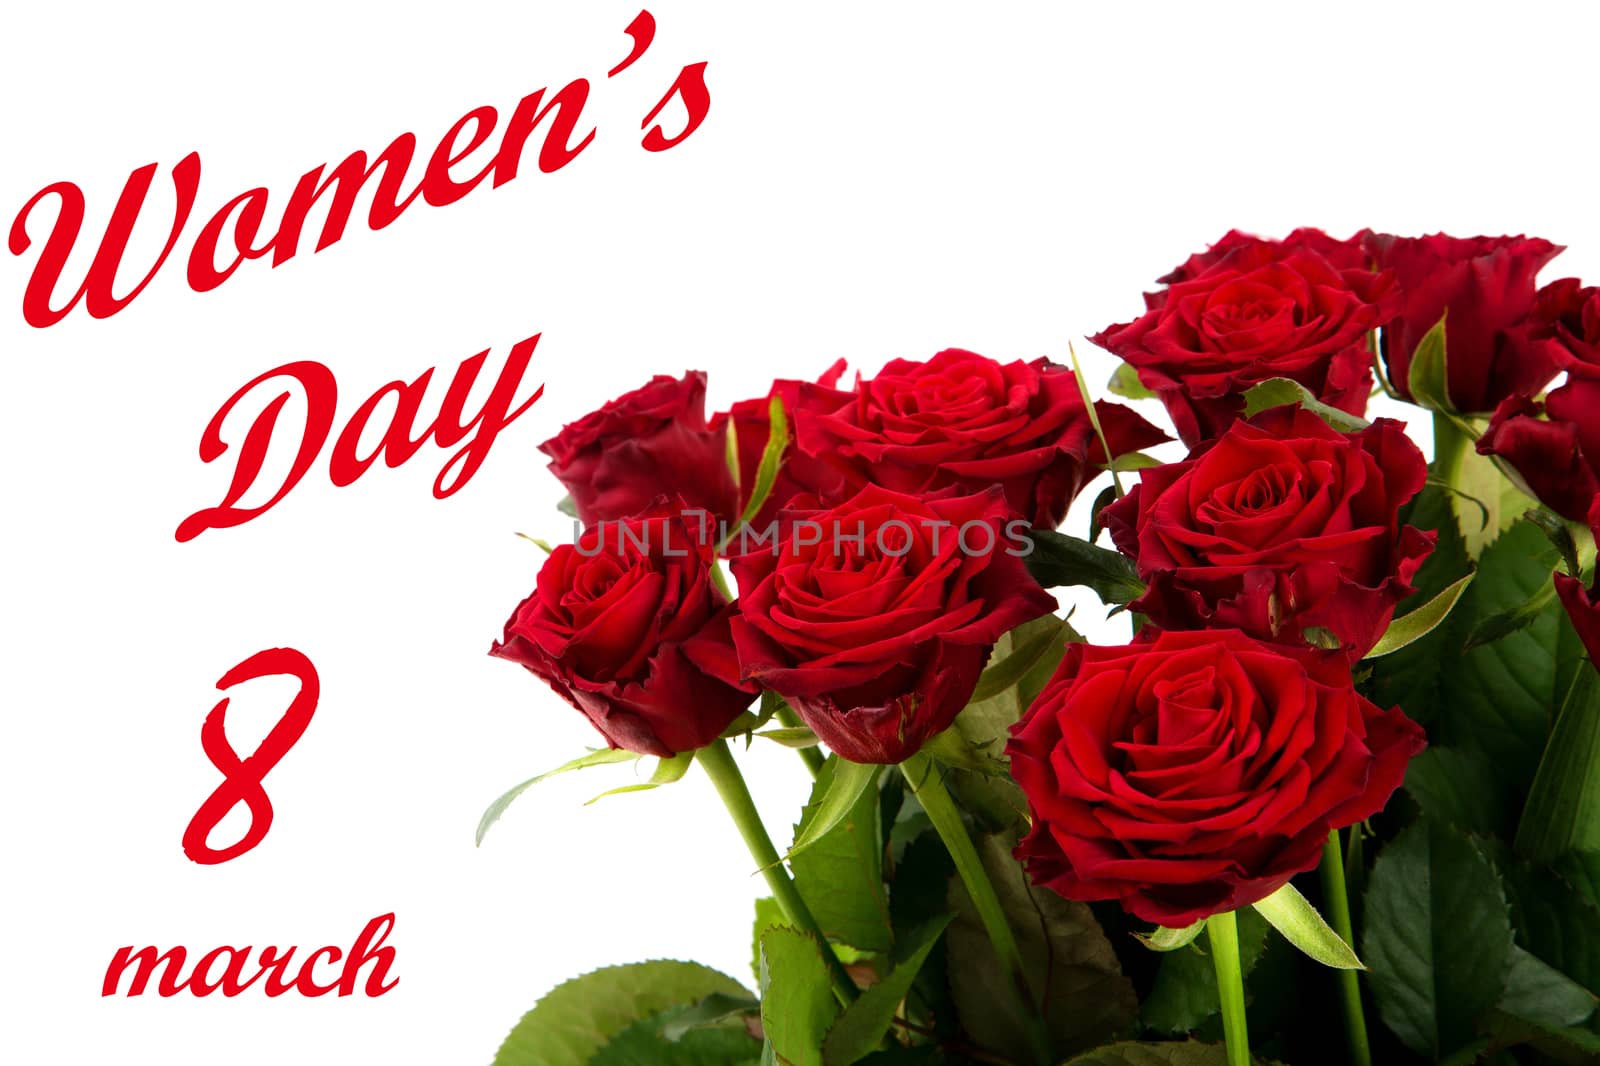 Happy Womens Day - red roses on a white background